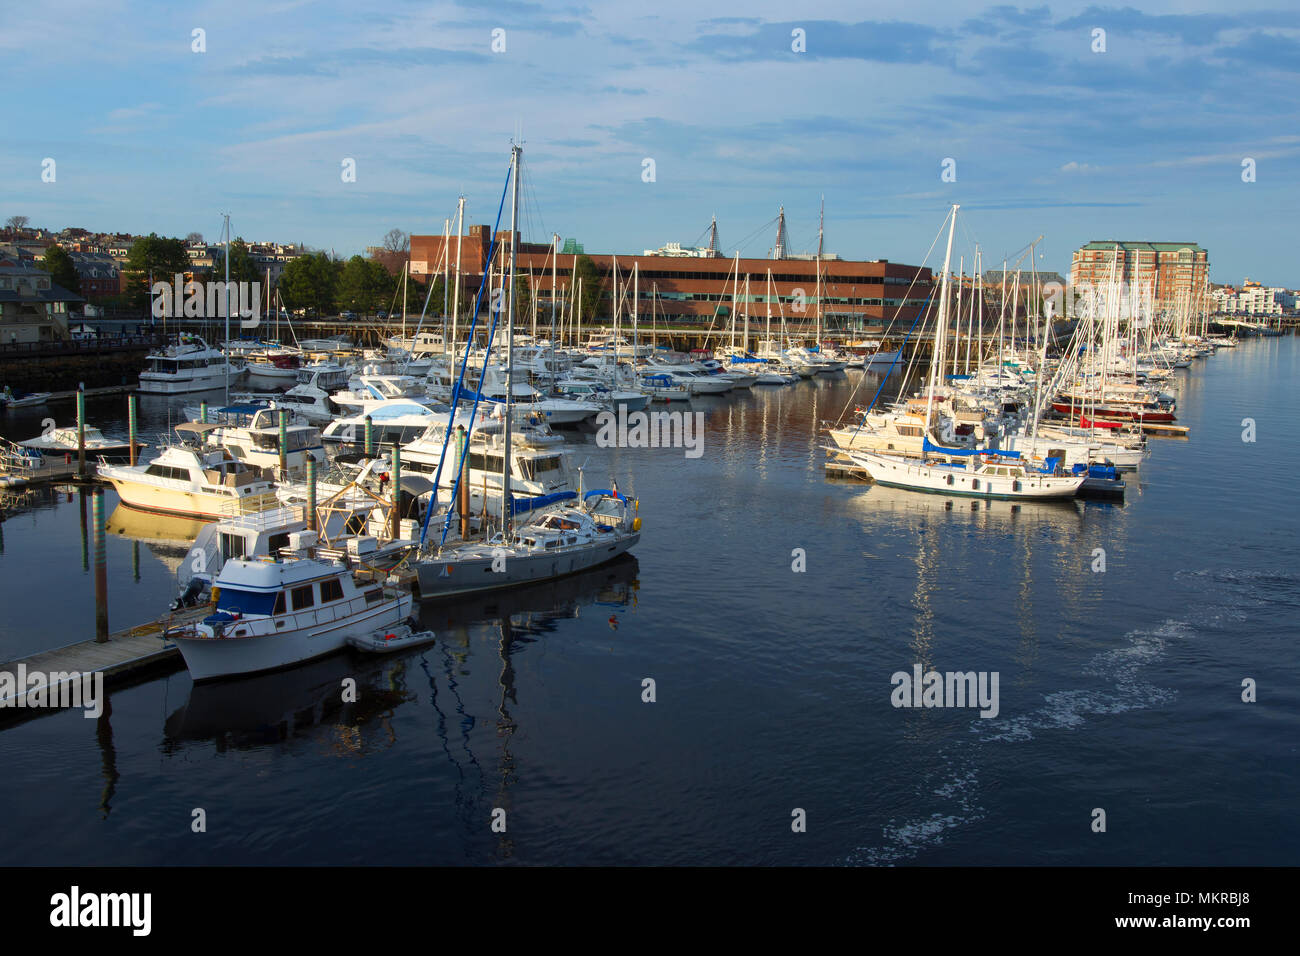 Early evening over a Marina in Charlestown, Massachusetts, USA, a section of the City of Boston, Massachusetts, USA Stock Photo